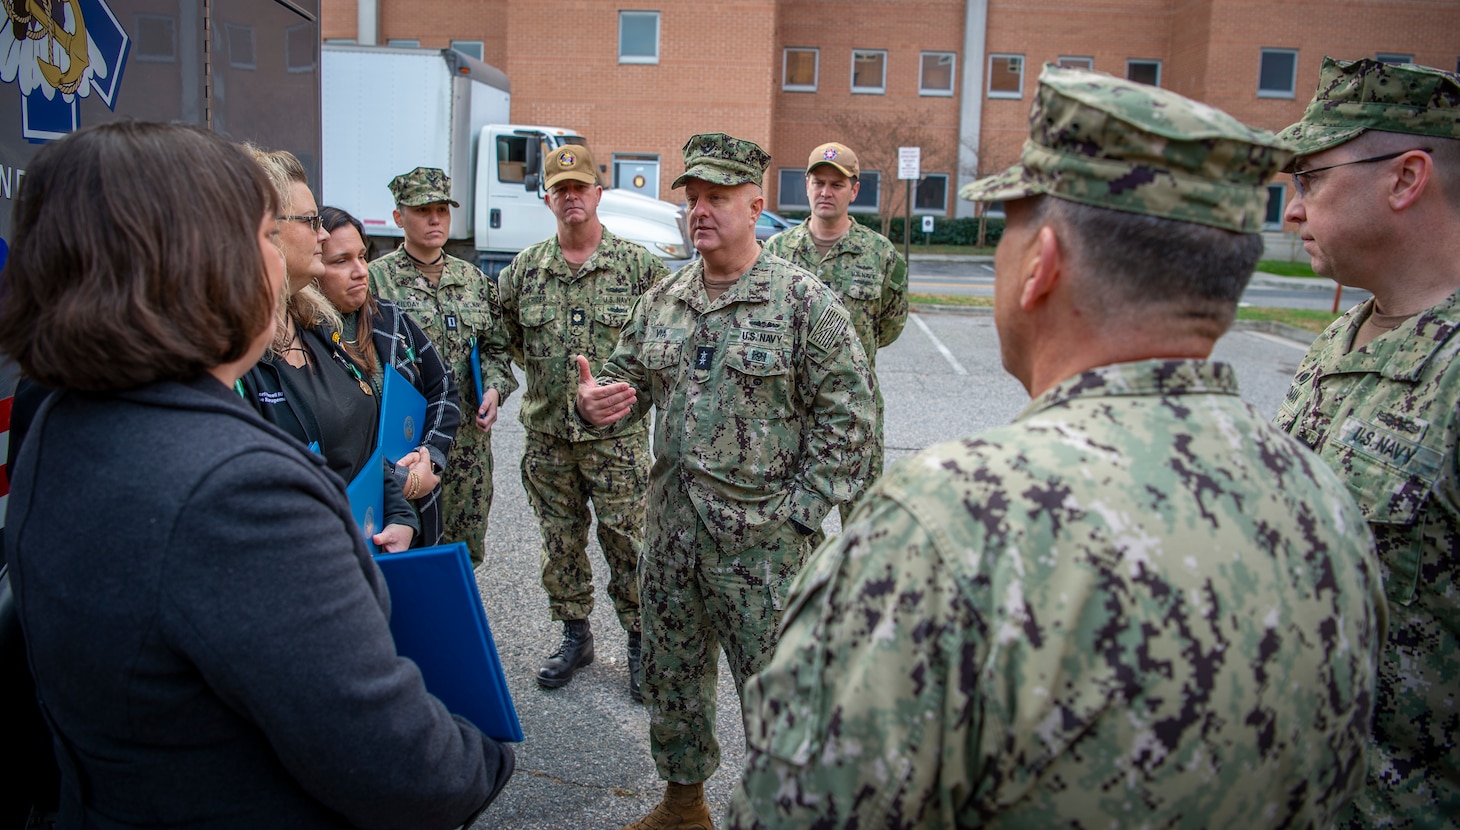 Surgeon General of the Navy Rear Adm. Darin Via, center, speaks with members from Naval Medical Center Portsmouth’s (NMCP) trauma team following a trauma center ribbon cutting ceremony in front of NMCP’s emergency room entrance on Dec. 8.